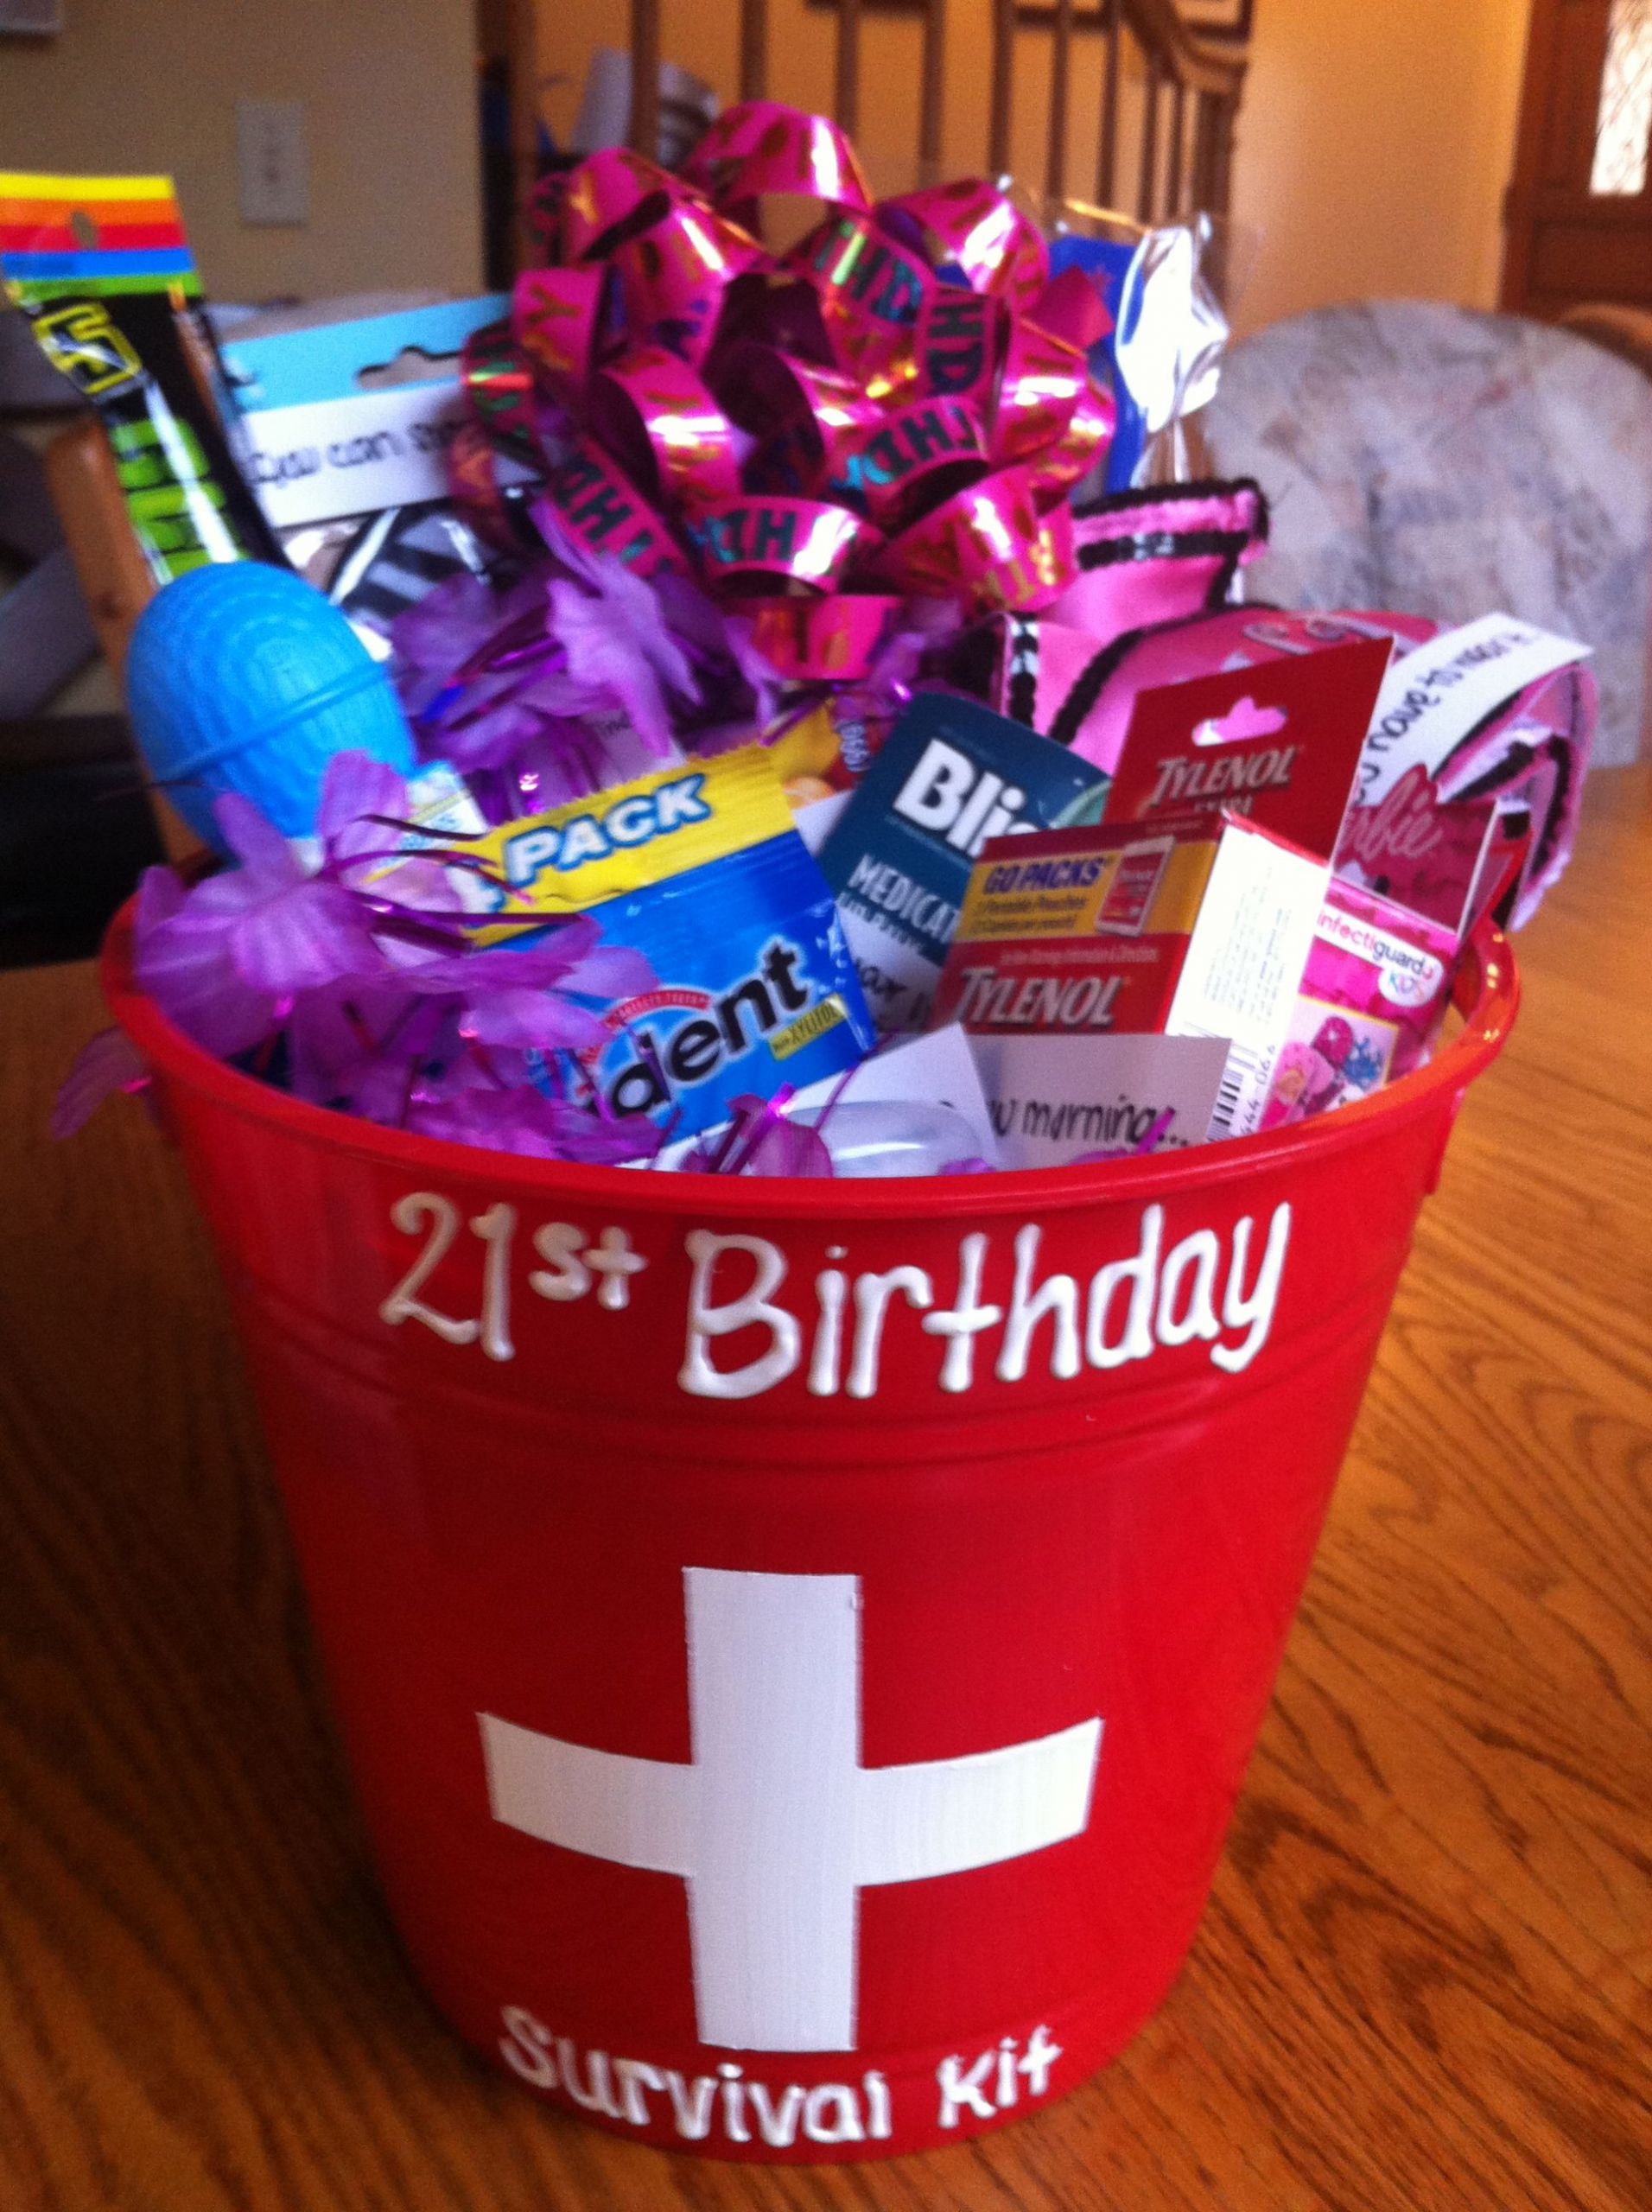 Best 24 Birthday Gift Baskets for Her Home, Family, Style and Art Ideas